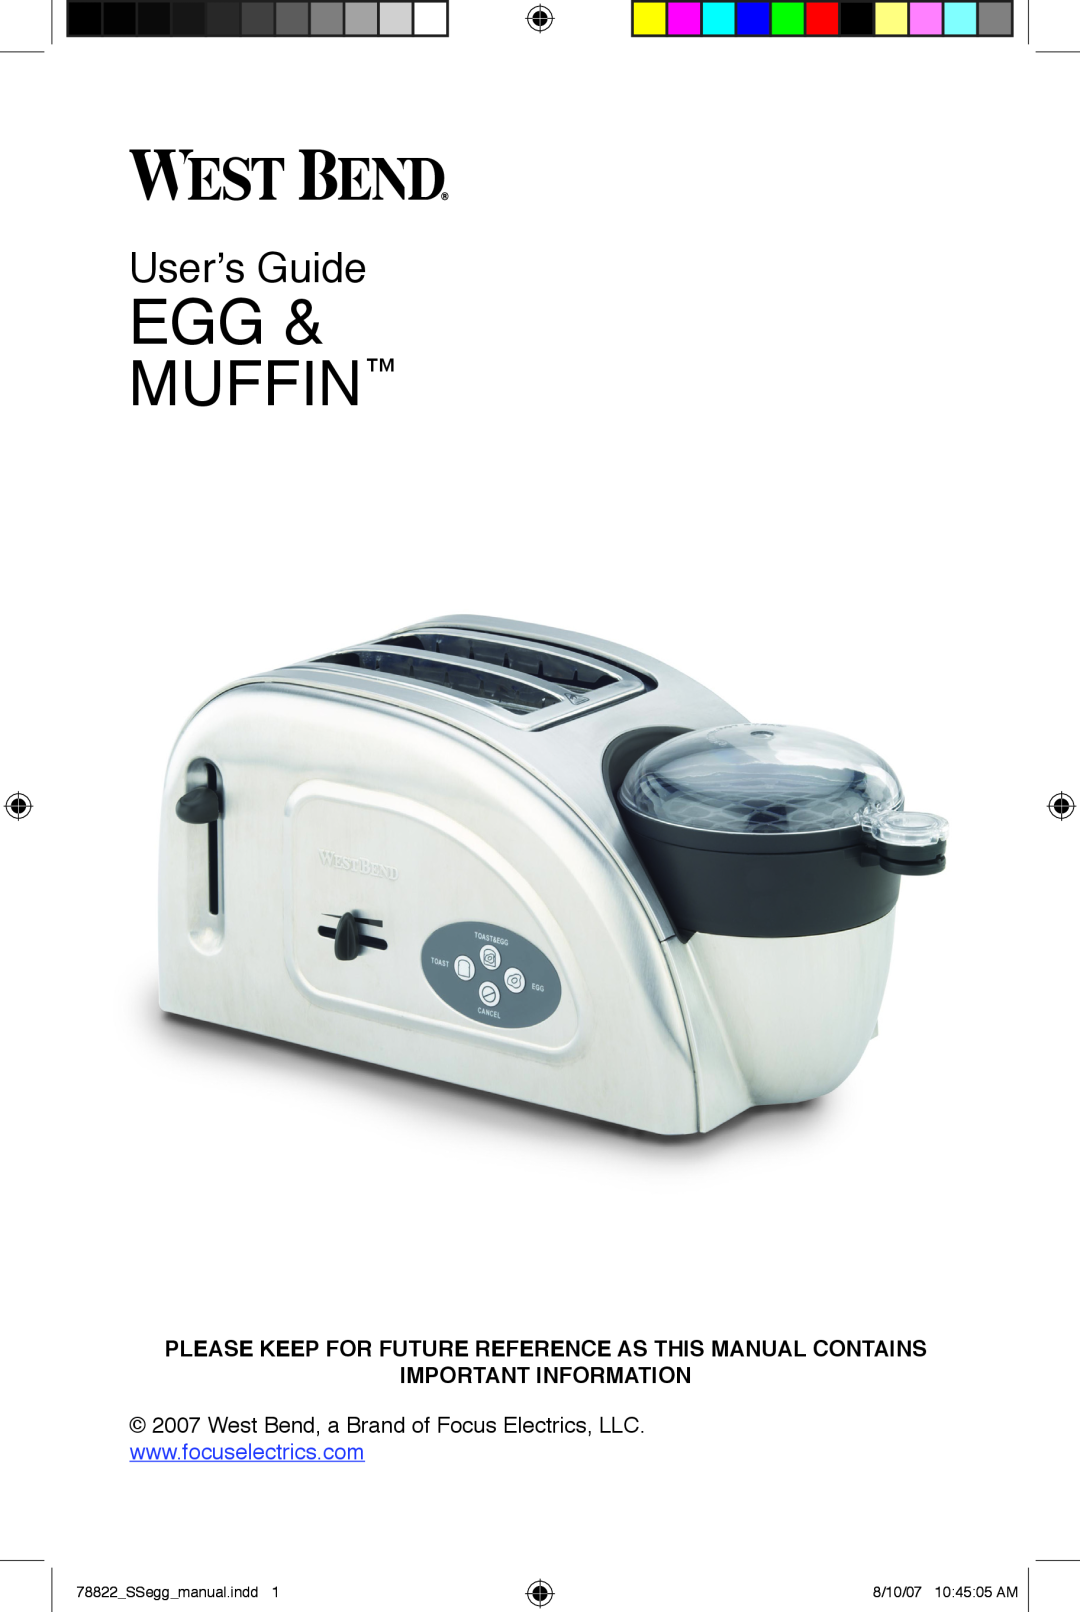 West Bend Egg and Muffin Toaster manual User’s Guide, Please Keep For Future Reference As This Manual Contains, Egg Muffin 